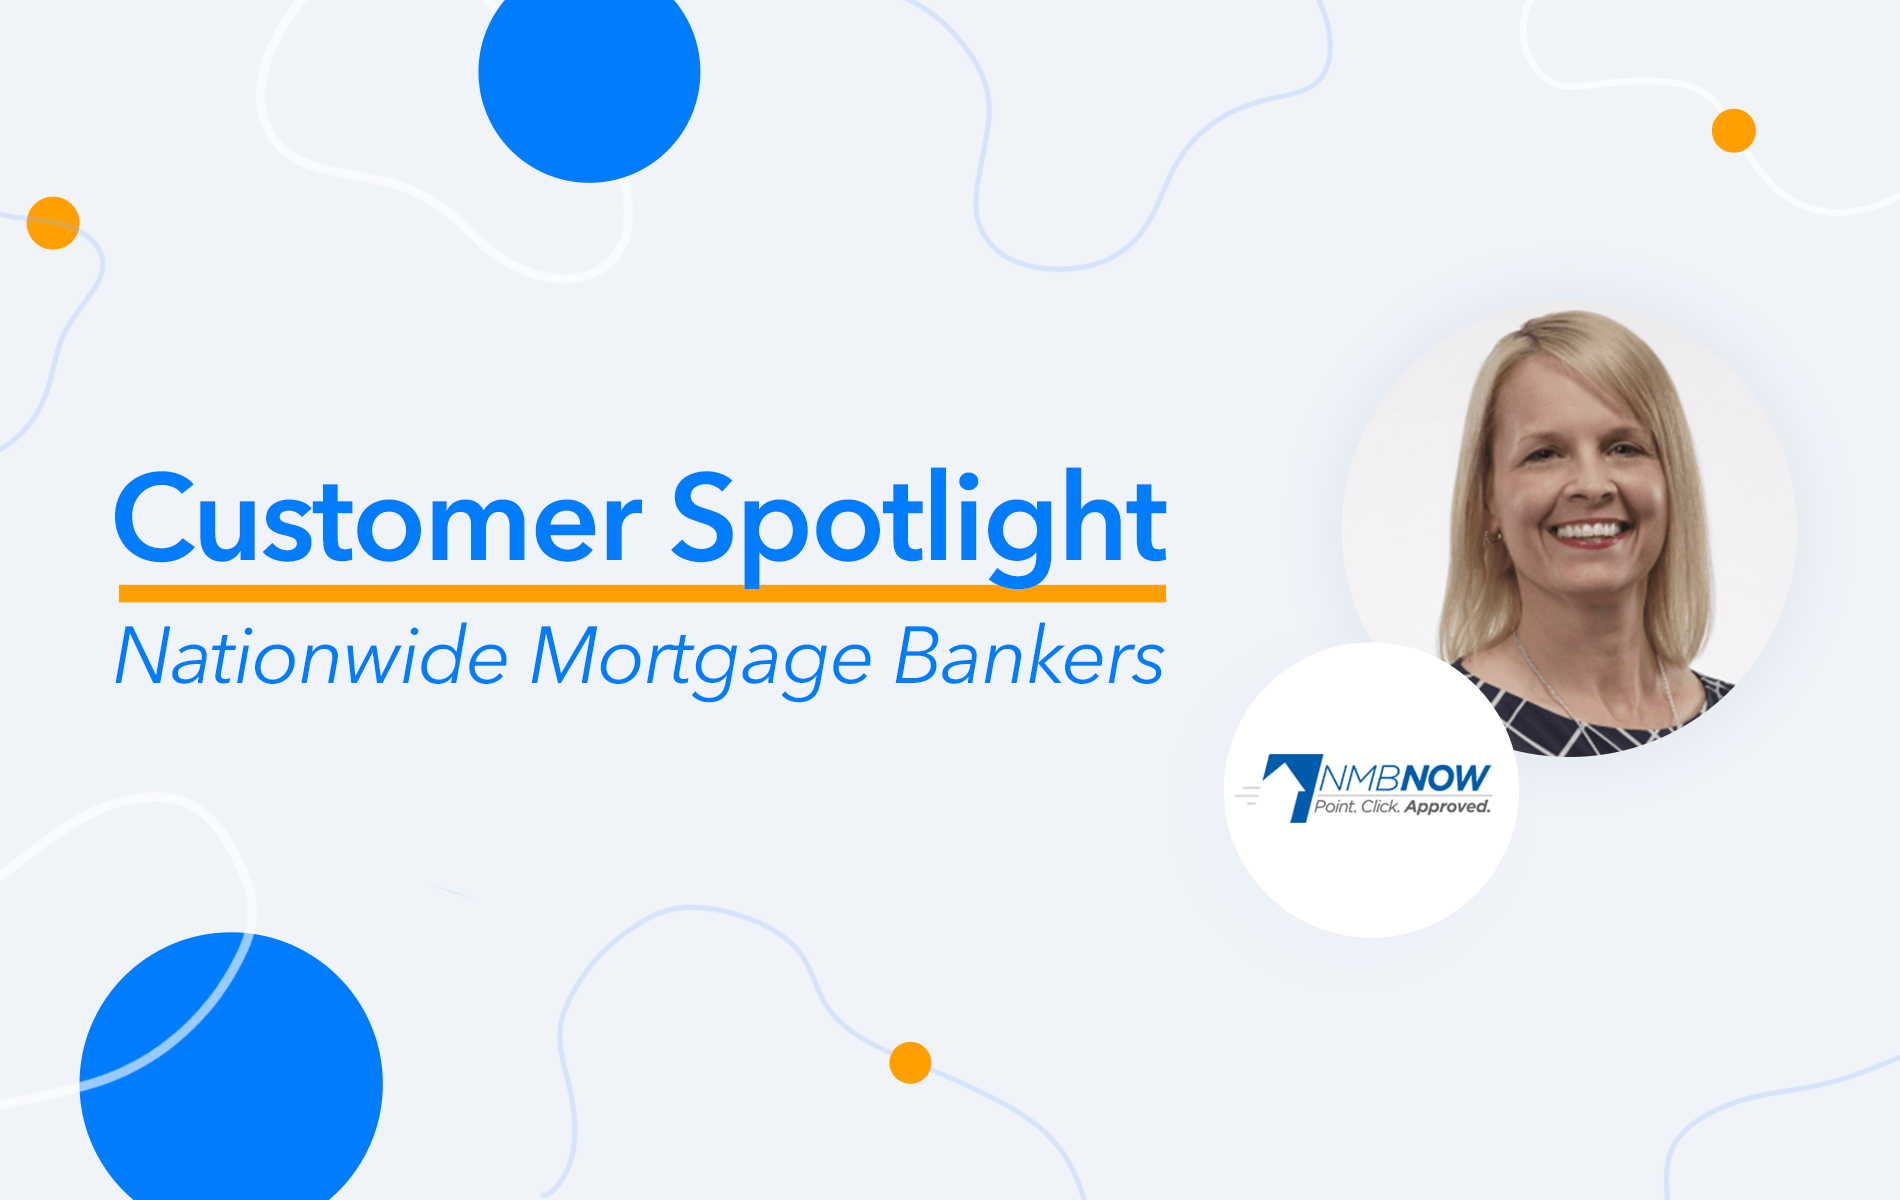 Customer Spotlight: 7 Questions With NMB